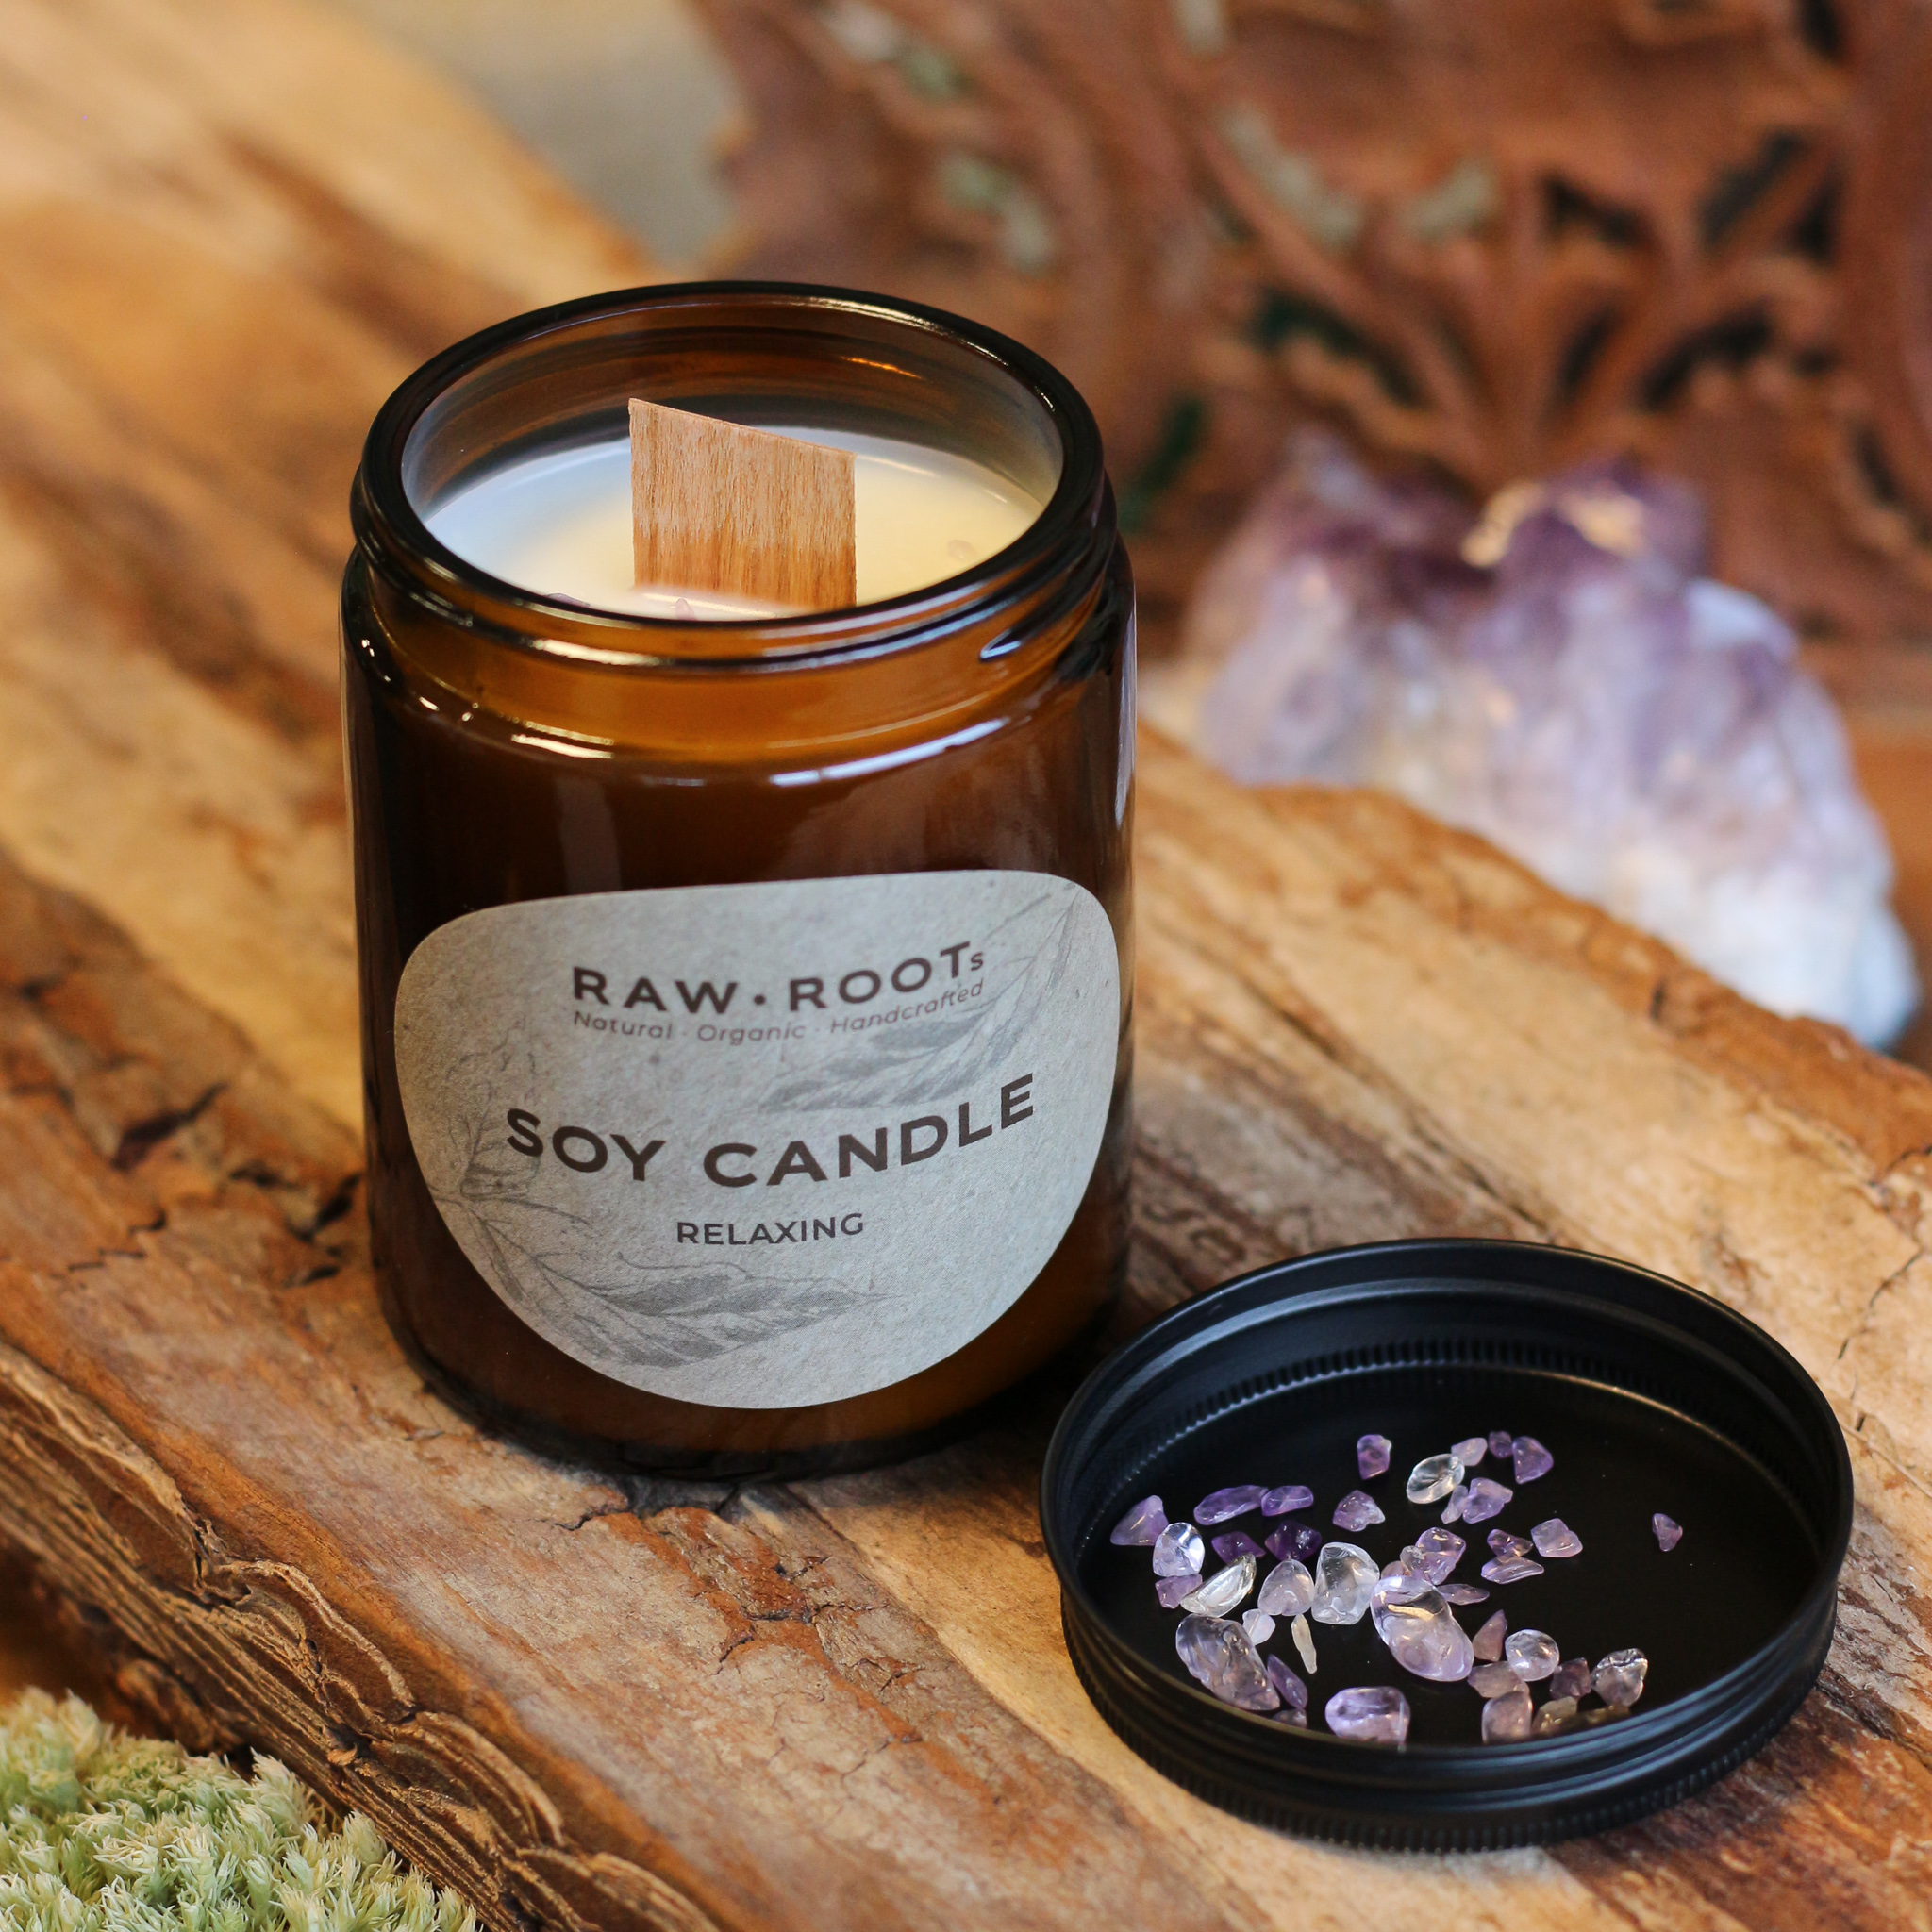 Buy Large Soy Candle with Crystals - Relaxing for 19,- at RAW ROOTs